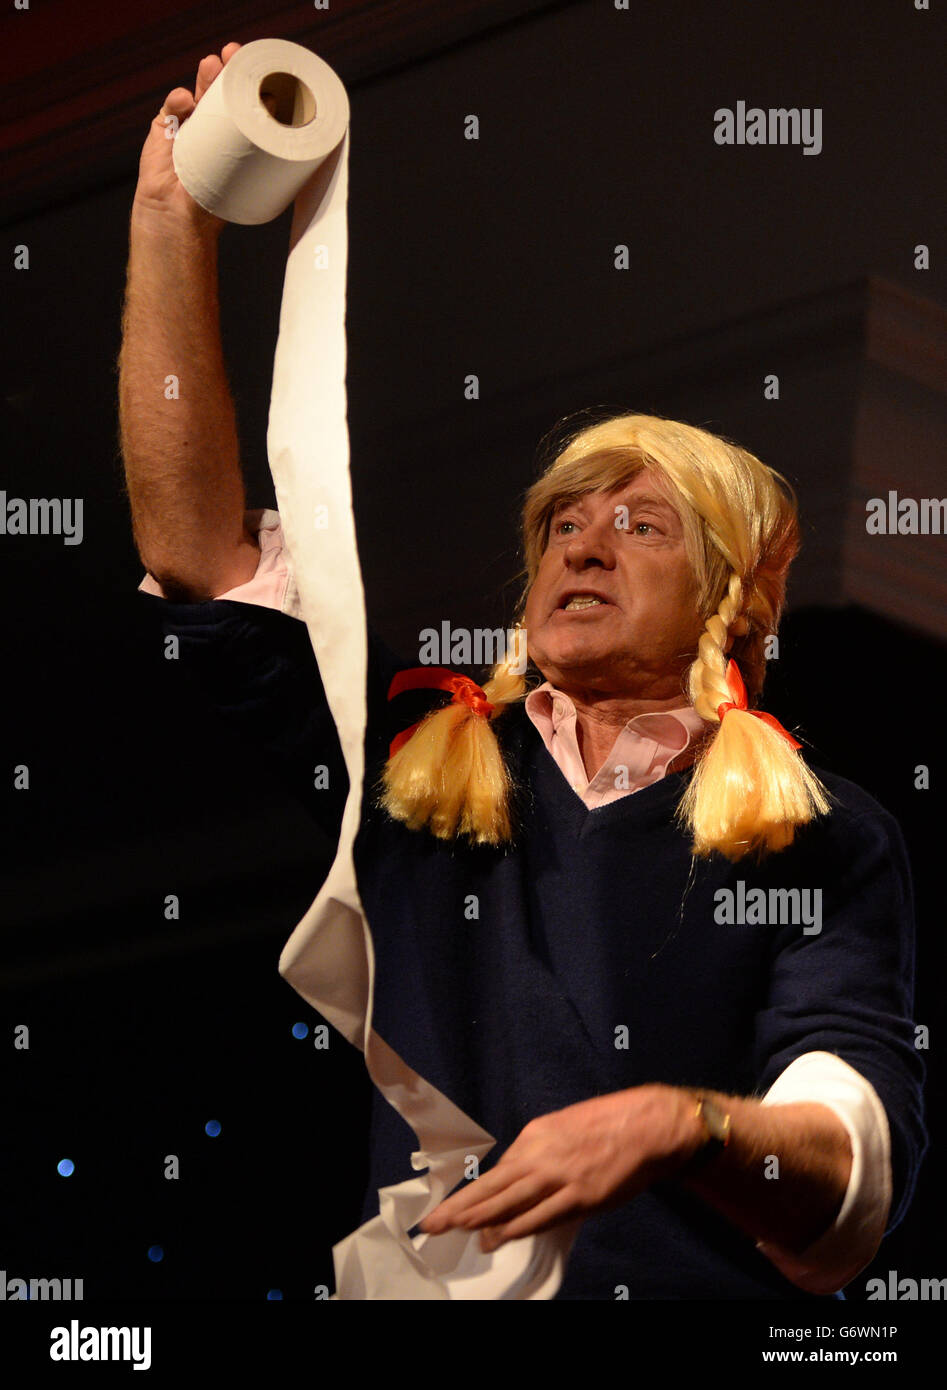 Michael Fabricant performs during the Macmillan Cancer Support annual Parliamentary Palace of Varieties fundraising evening at the Intercontinental London Park Lane, London. Stock Photo